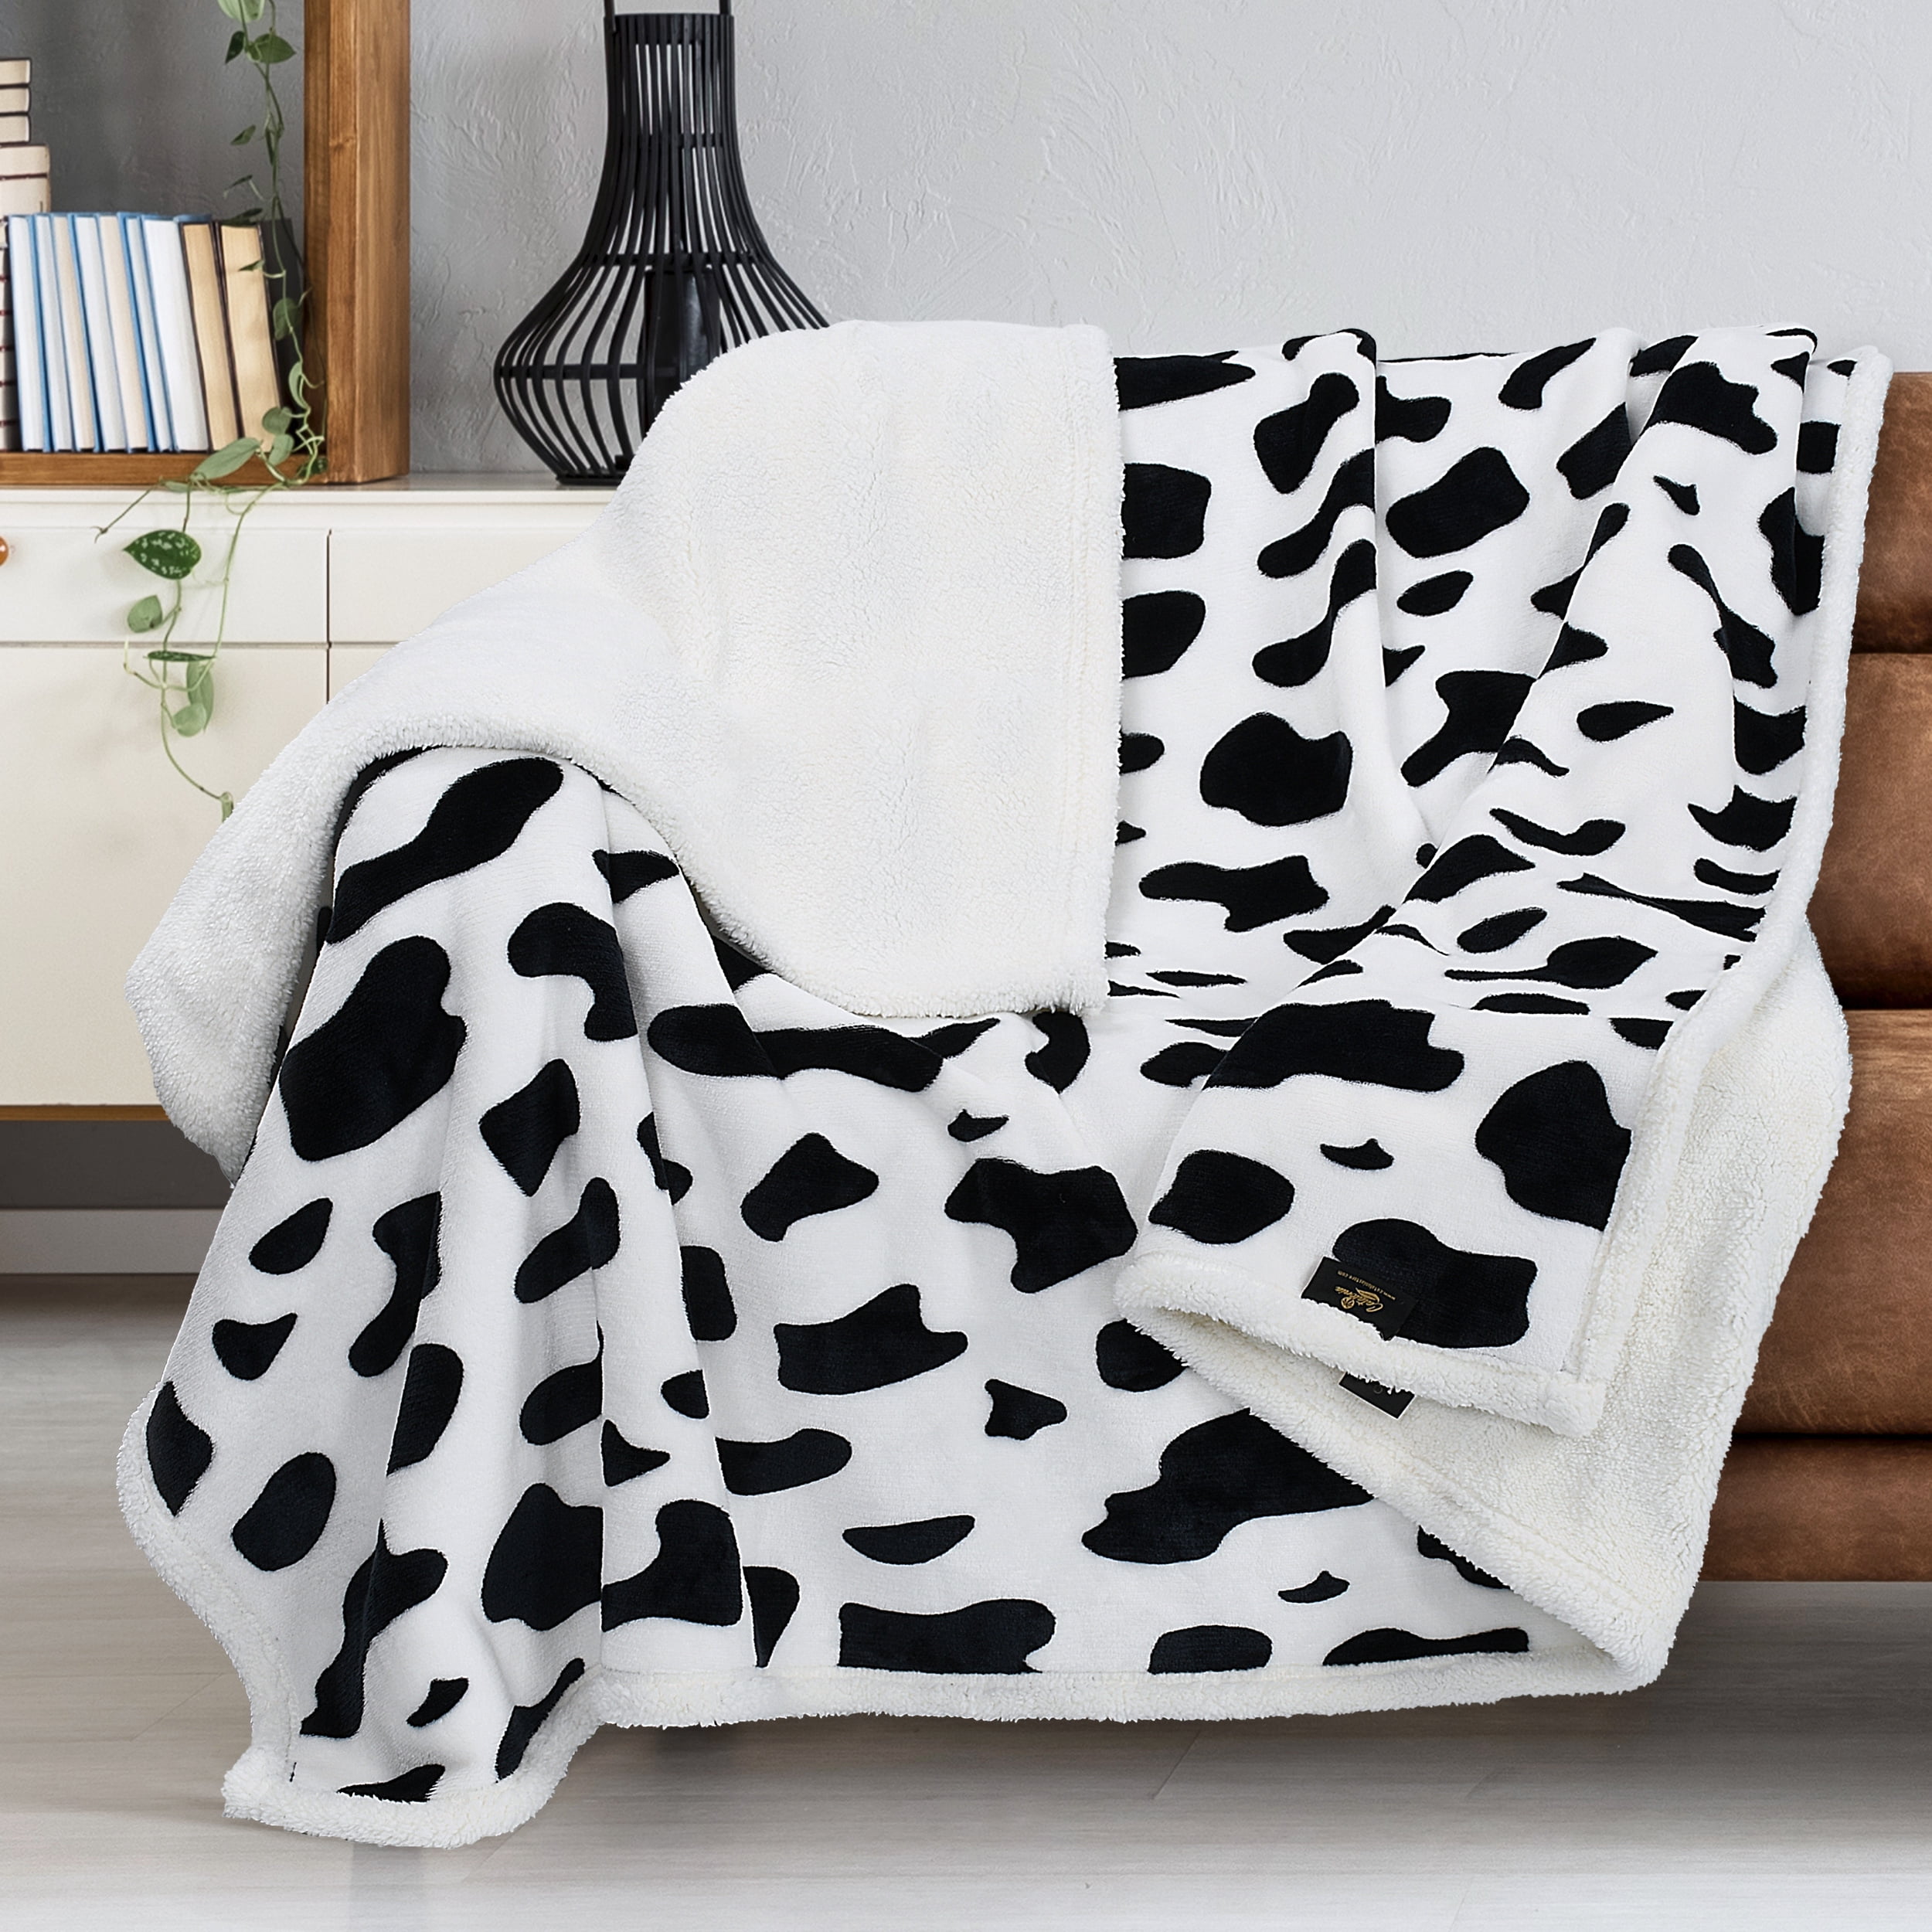 Black and White Cows Print Throw Blanket for Couch Super Soft Lightweight Flannel Blankets for Sofa Bedroom Living Room 50 X 60 Inches 